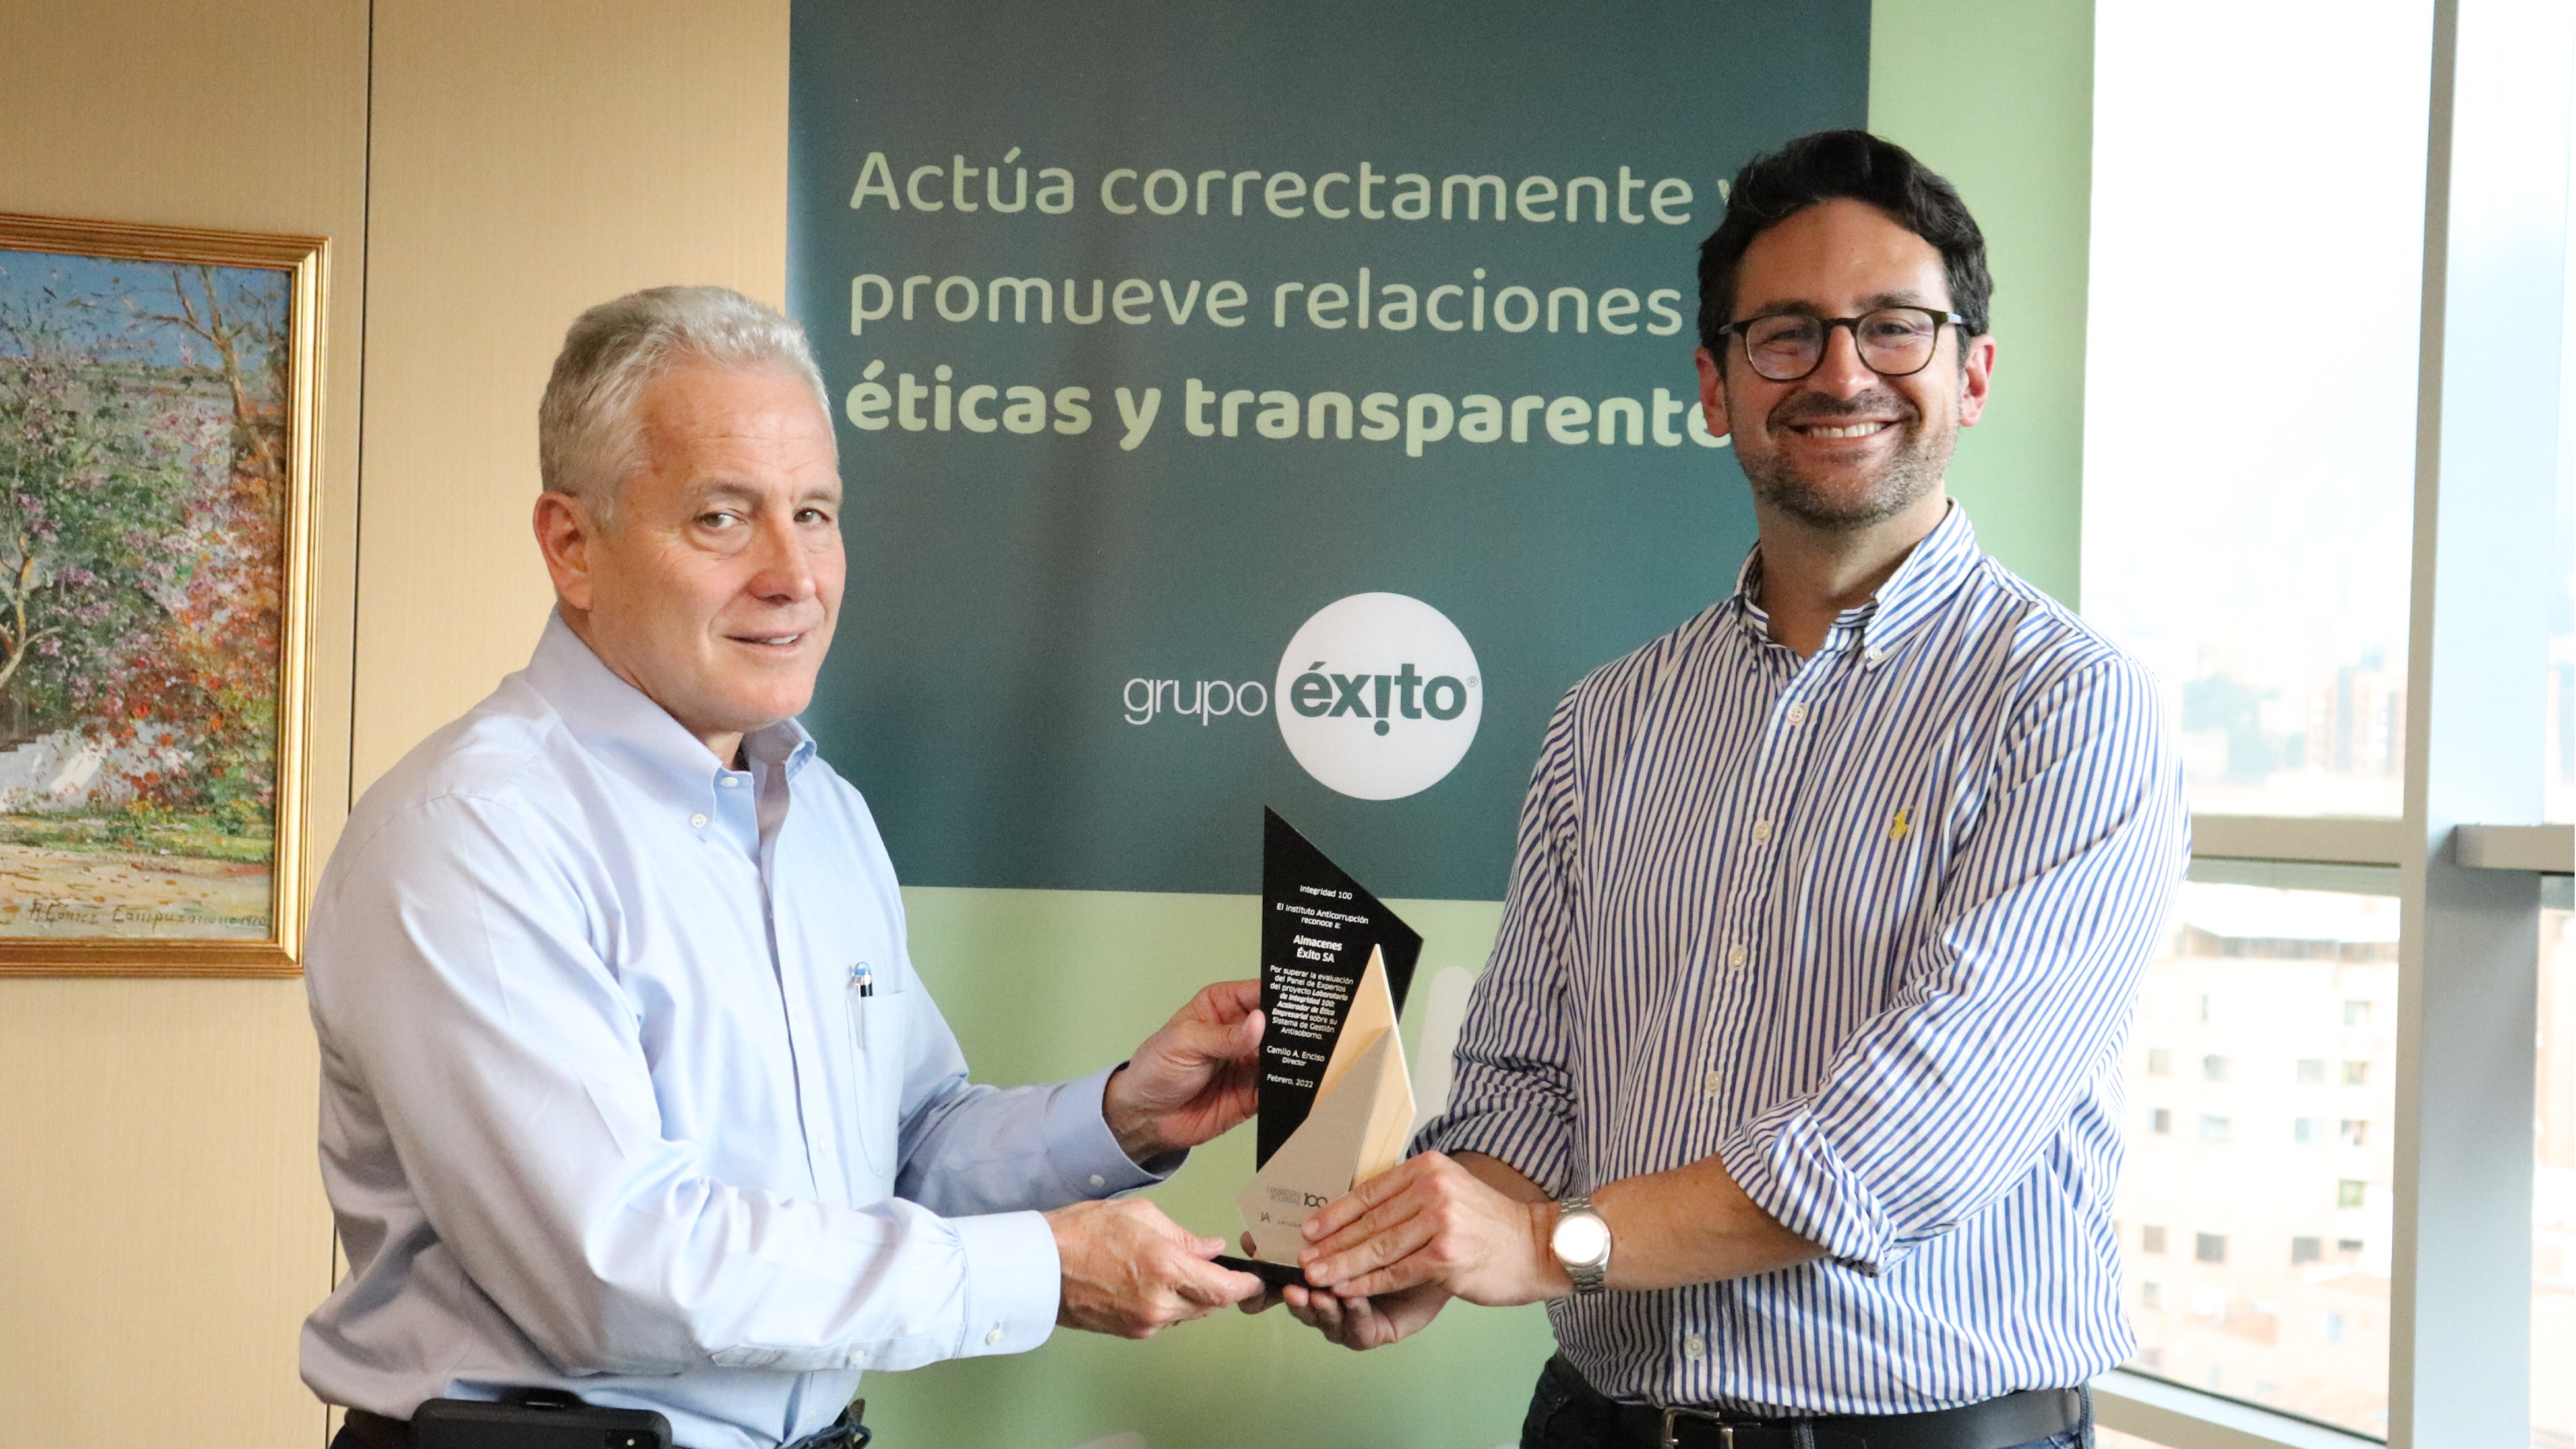 Grupo Éxito: the first company to surpass the Integrity 100 Laboratory Business Ethics Accelerator threshold